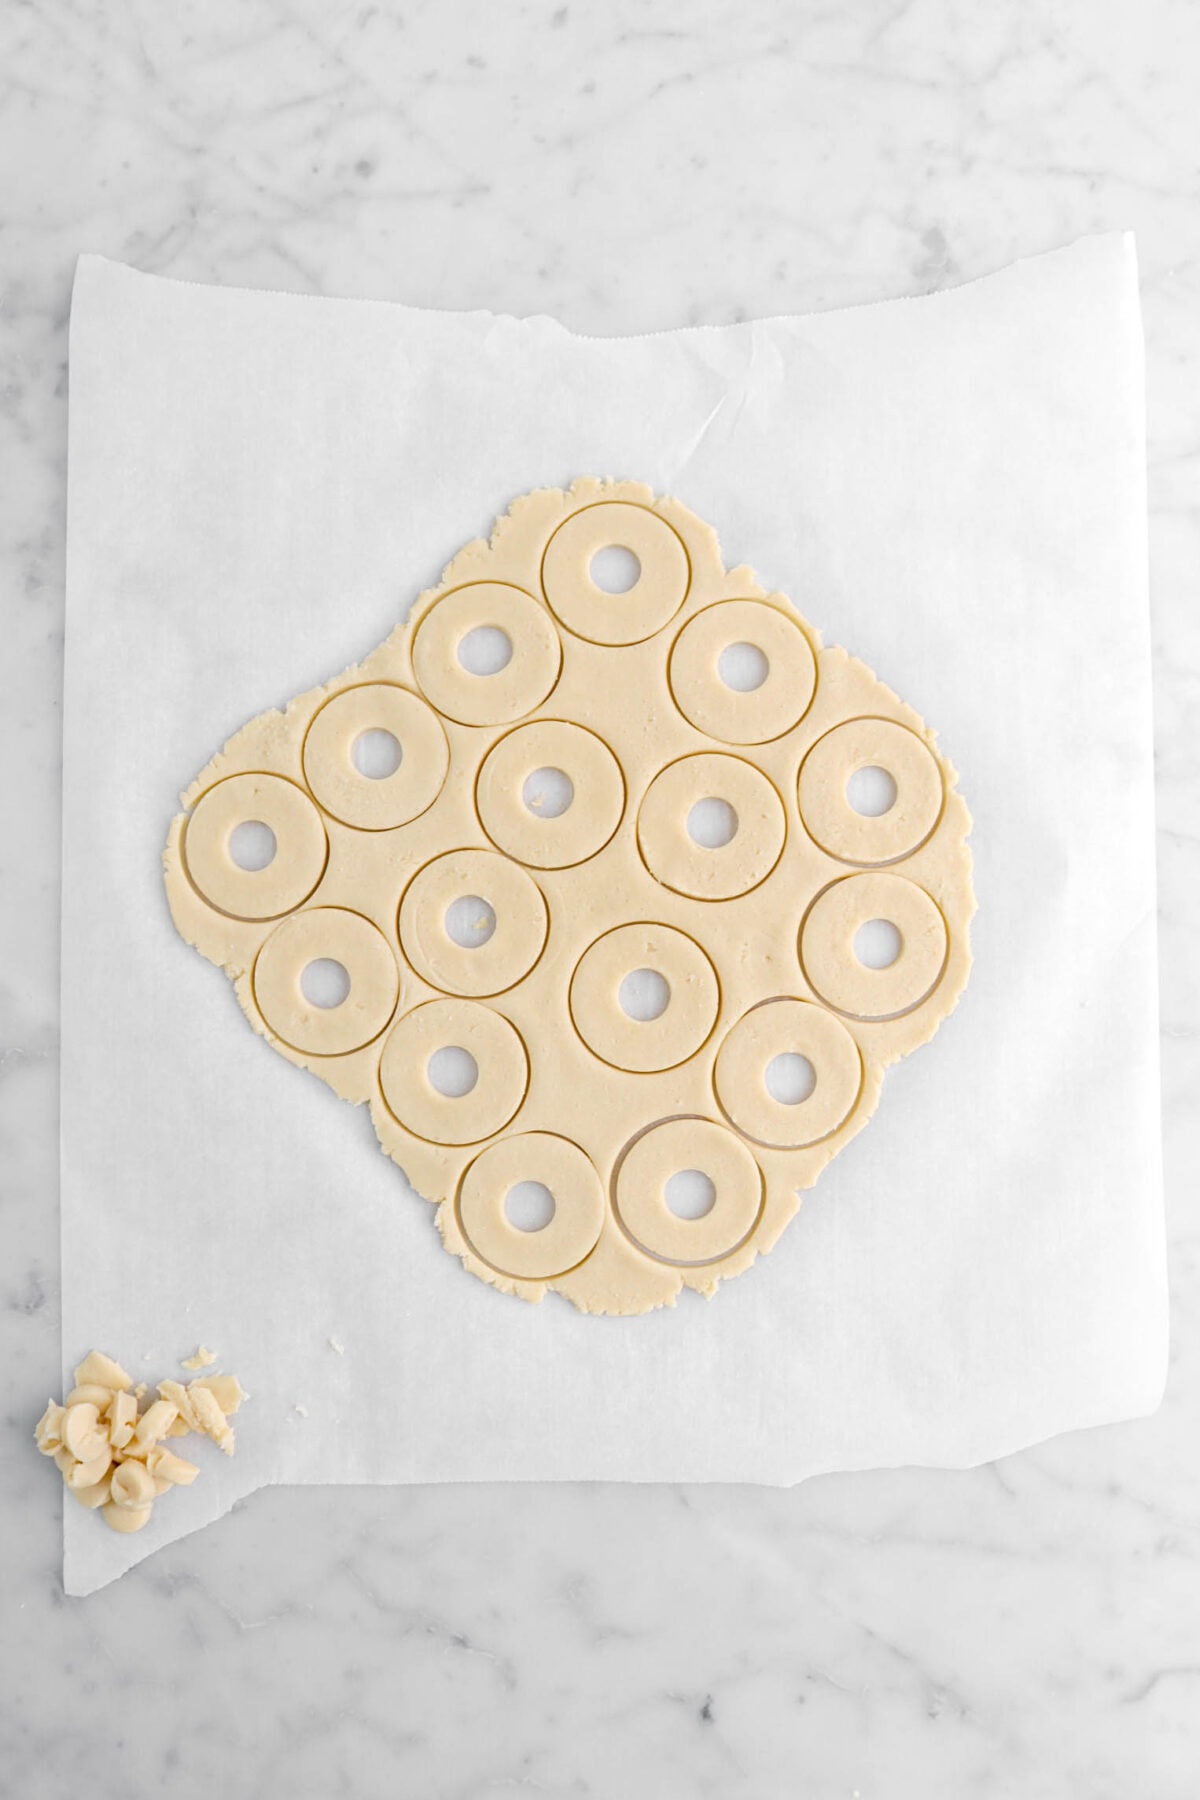 small circles cut into the middle of each round of shortbread on parchment paper.